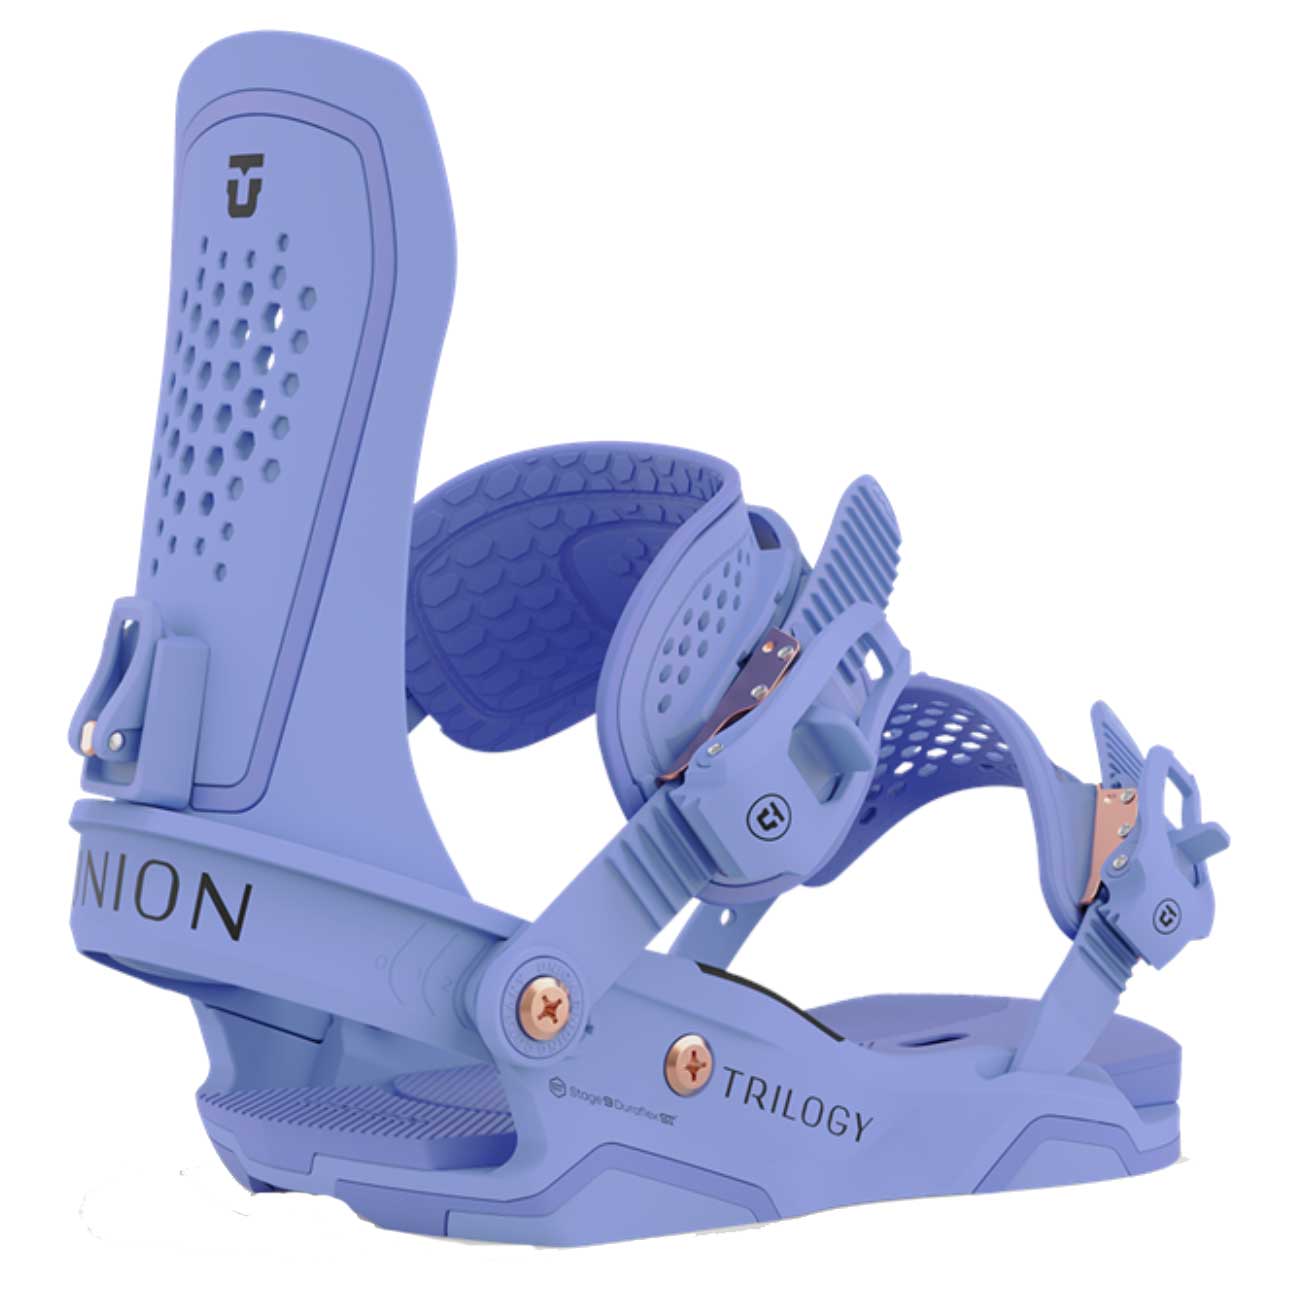 Union Trilogy 2010-2020 Snowboard Binding Review